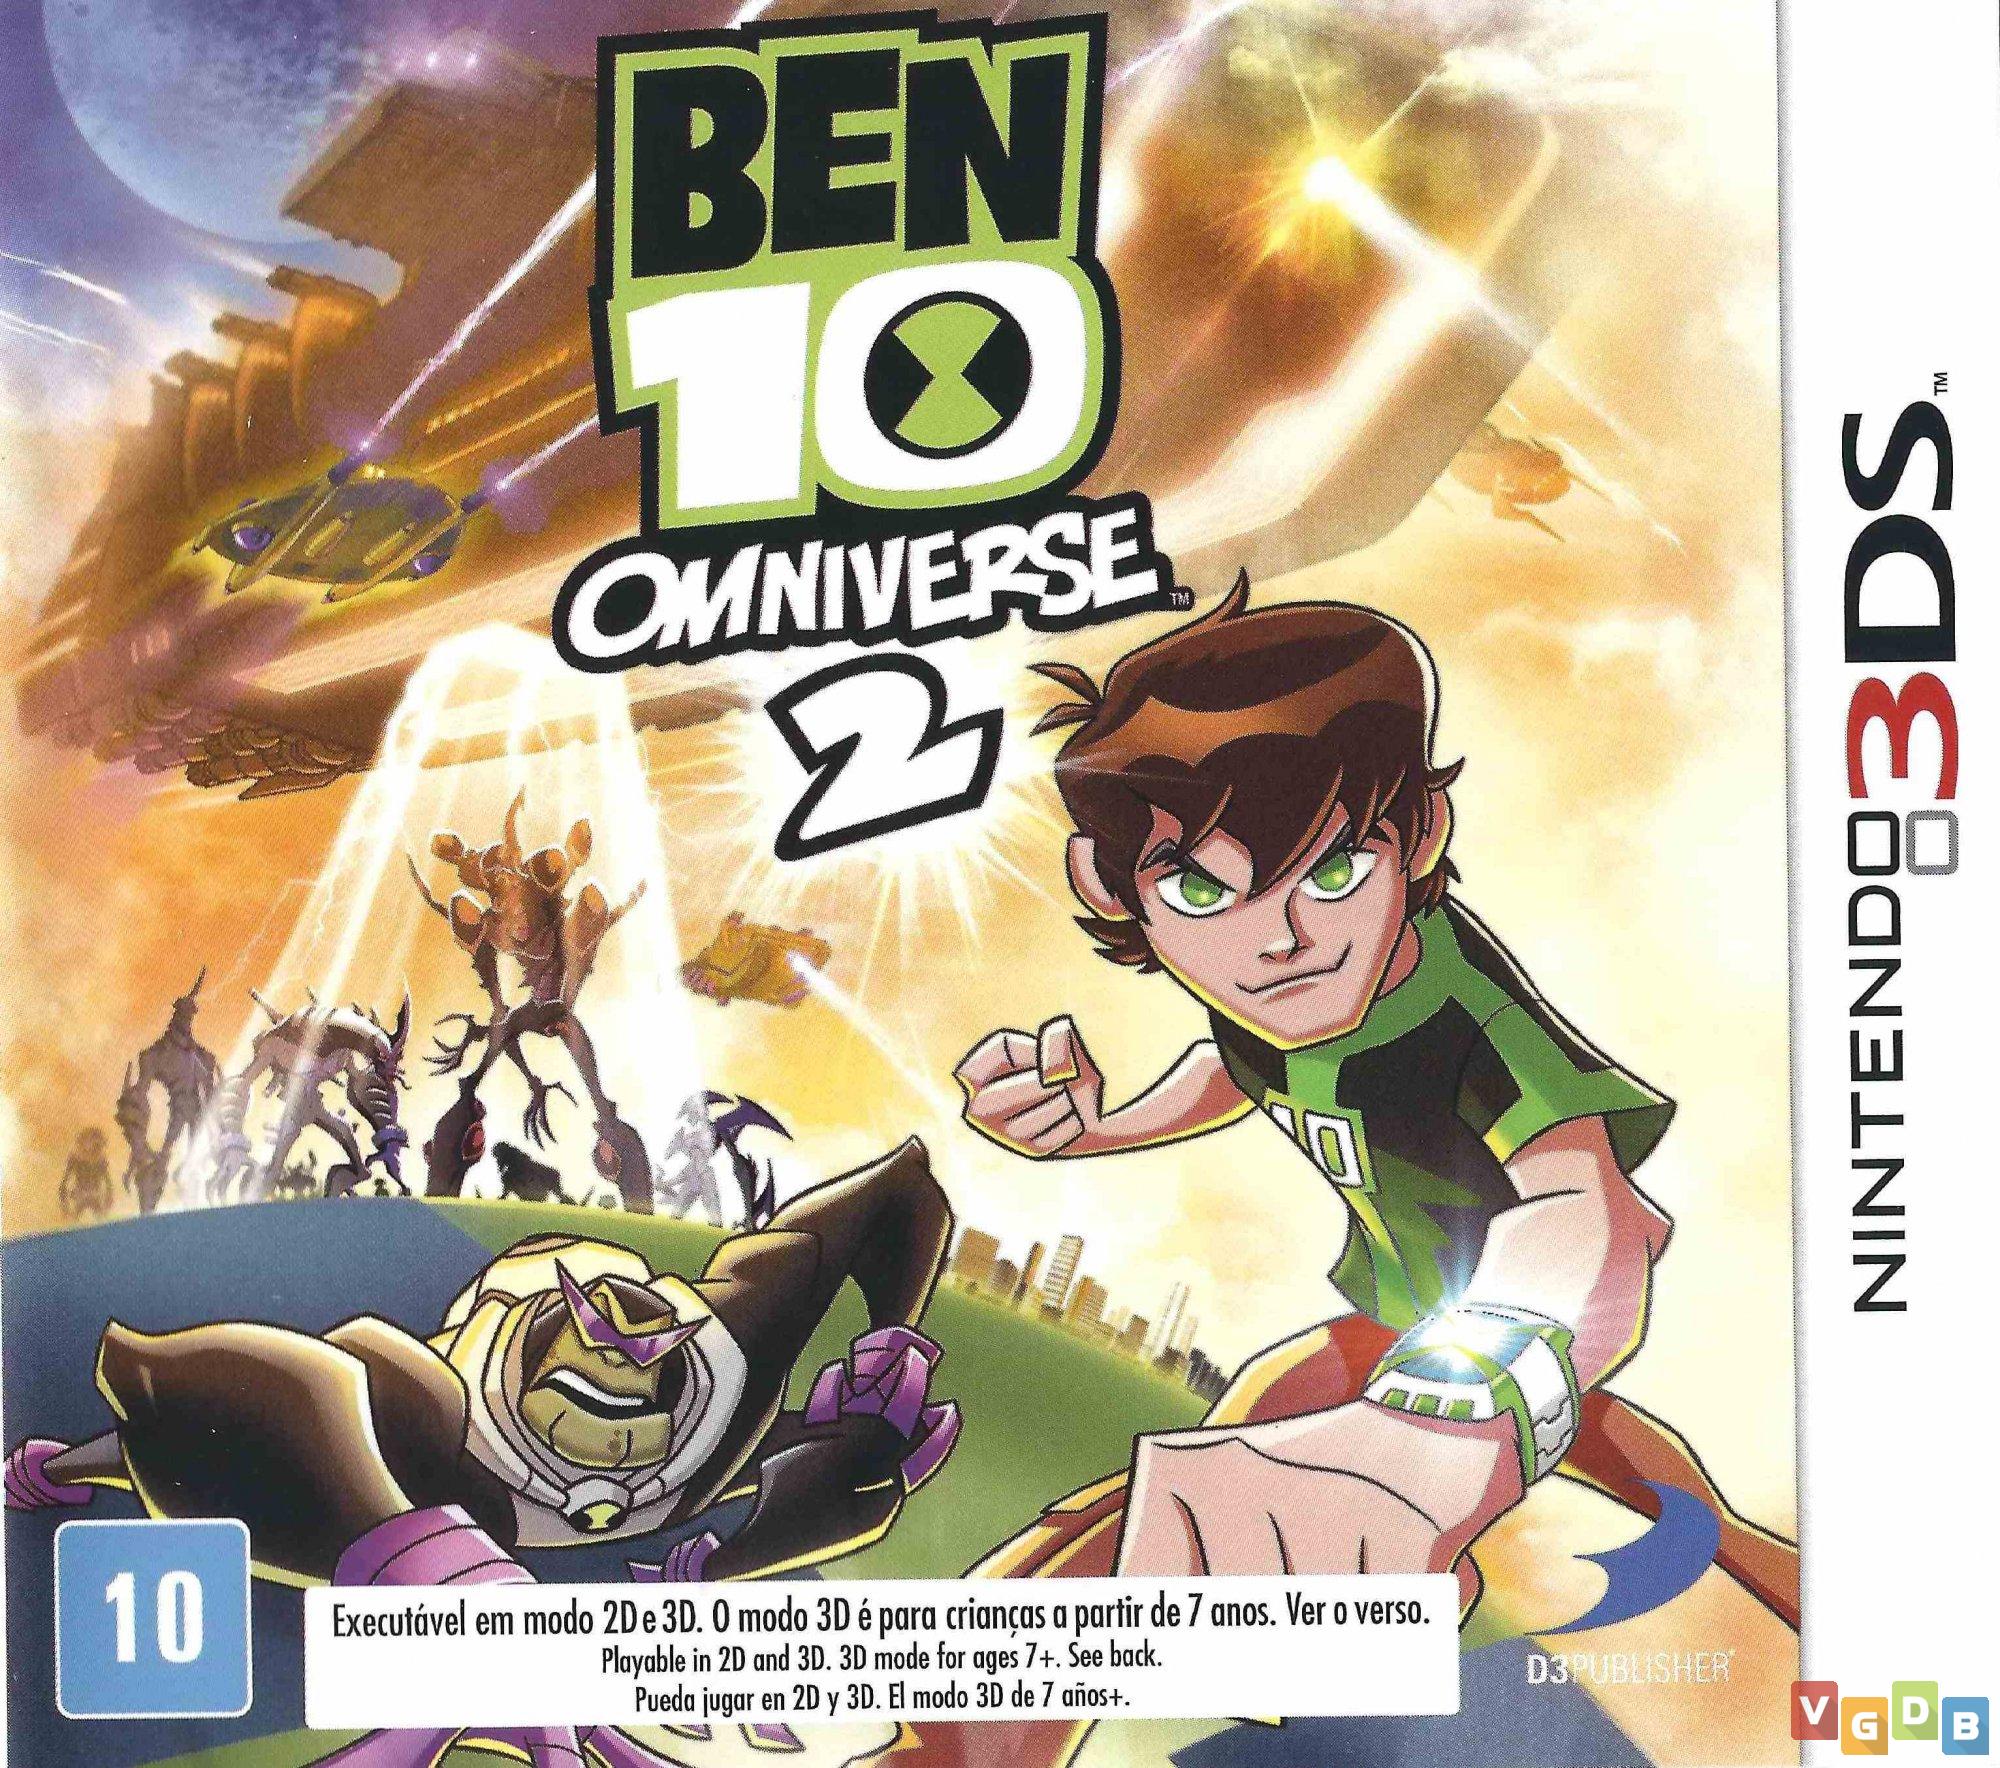 ben 10 omniverse 2 3ds cover